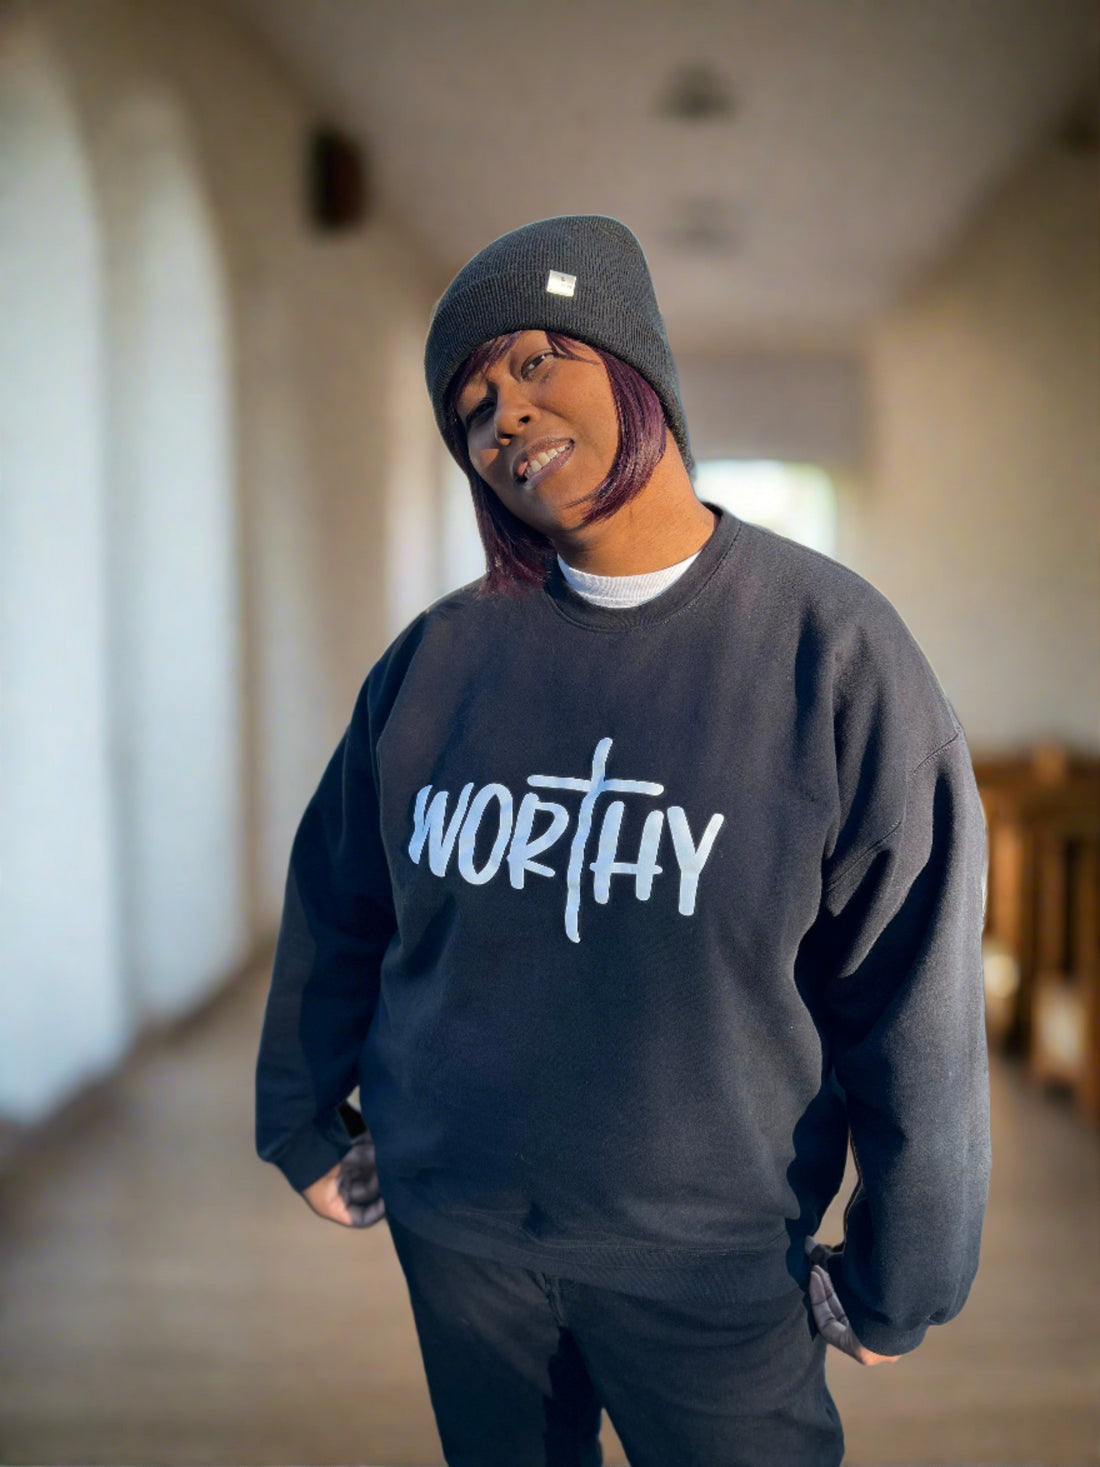 Black plus size woman wearing a black sweatshirt with the word, "Worthy" in white.